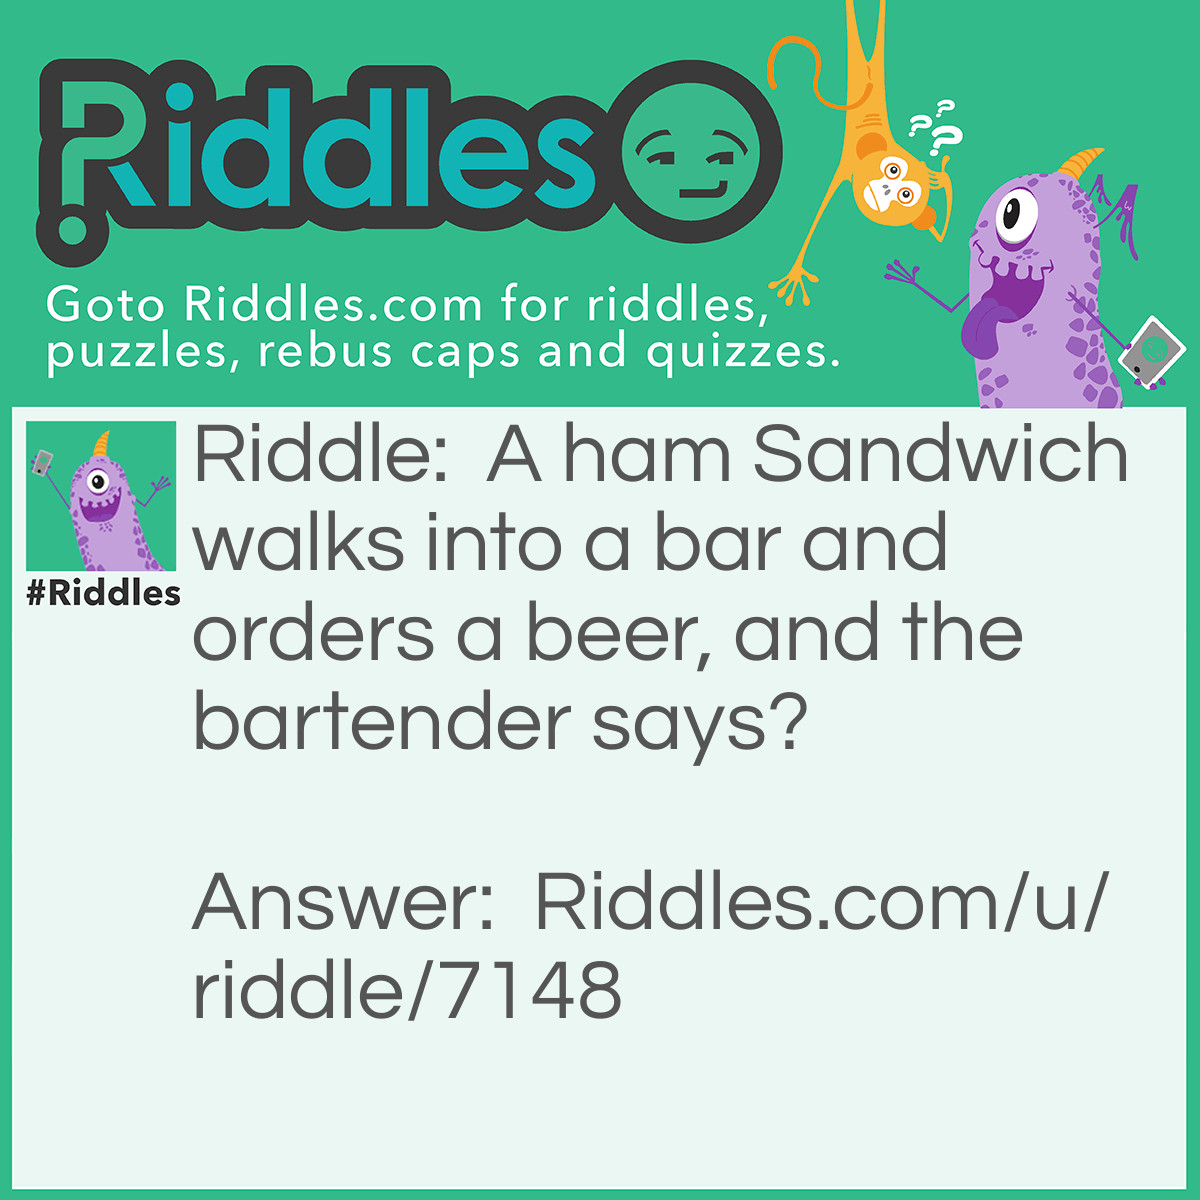 Riddle: A ham Sandwich walks into a bar and orders a beer, and the bartender says? Answer: "Sorry we don't serve food here".